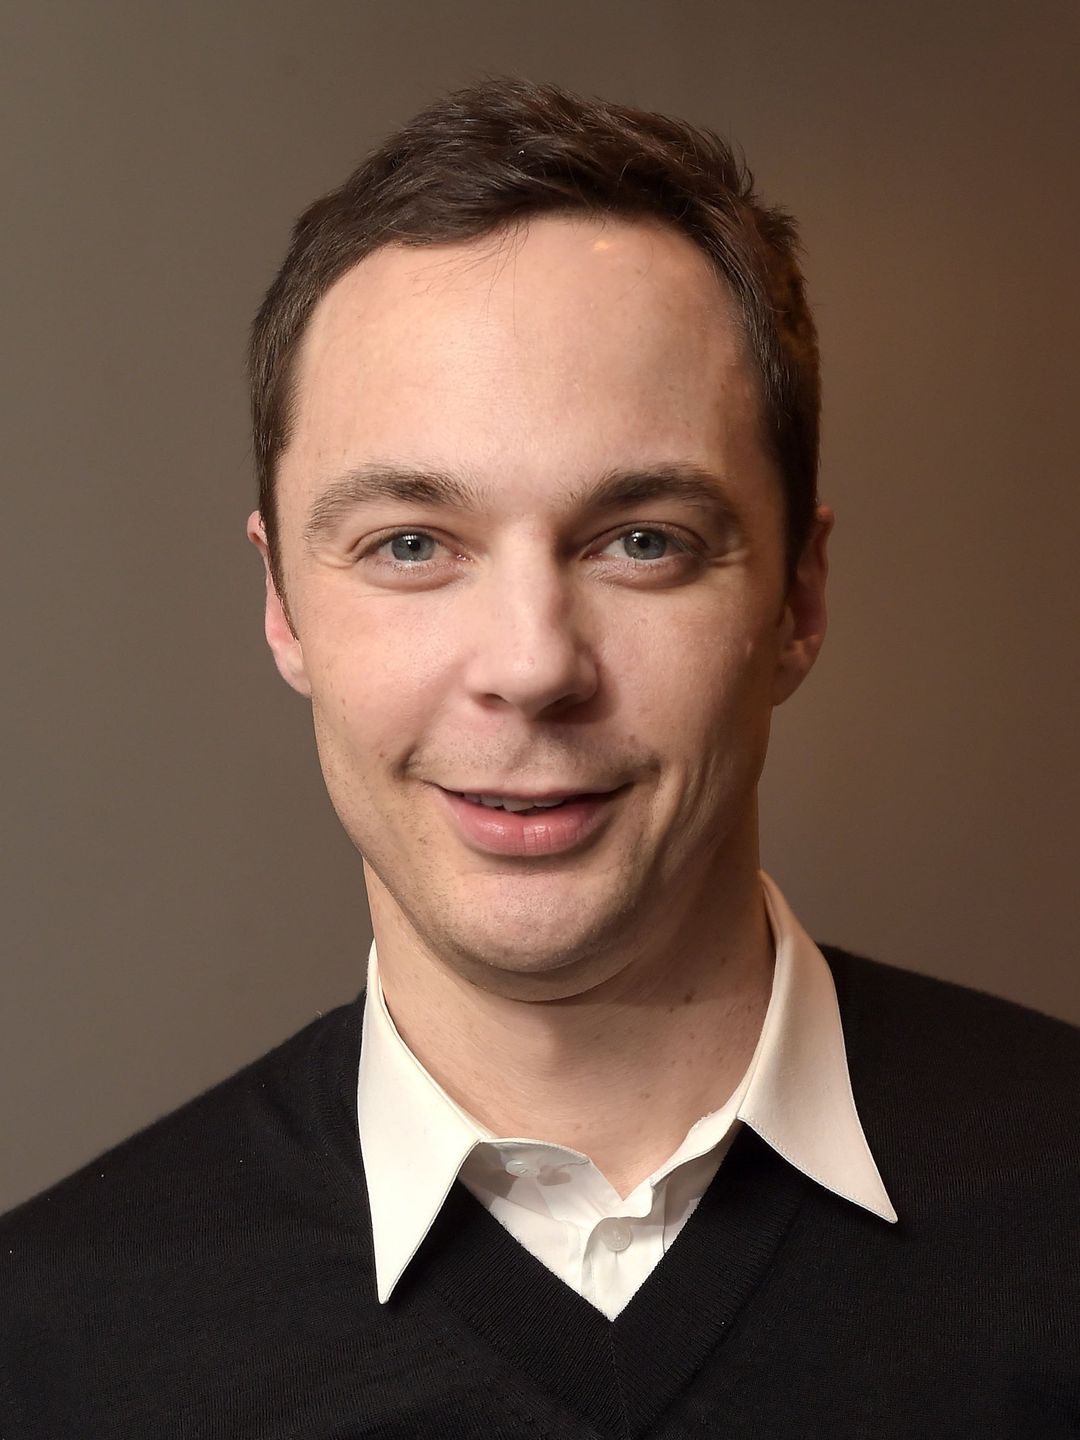 Jim Parsons height and weight